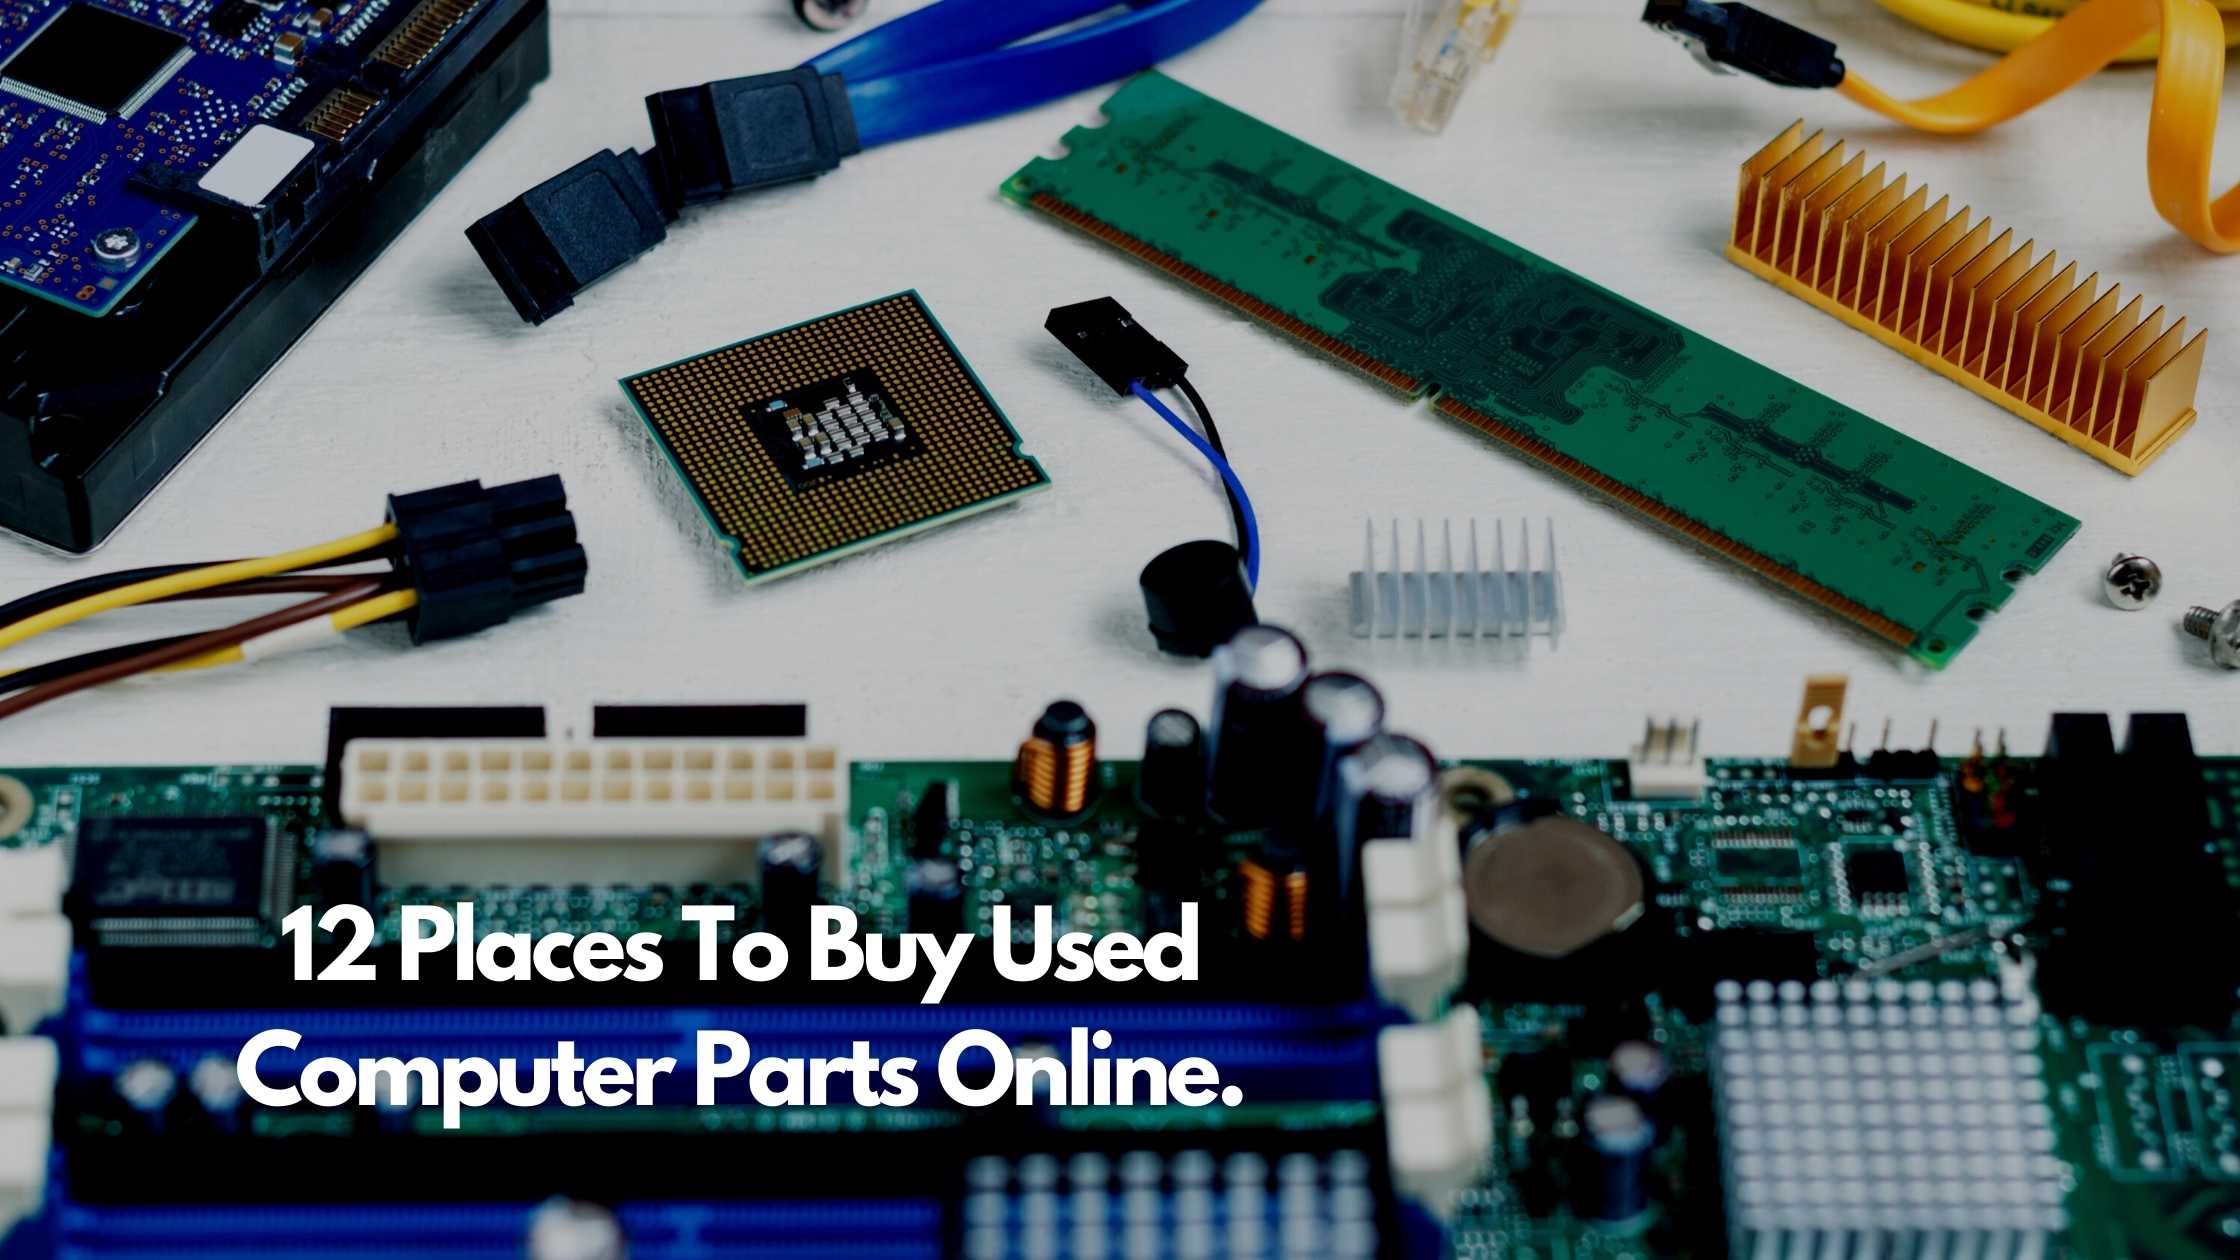 The 8 Best Cheap Computer Parts Stores for Saving Money